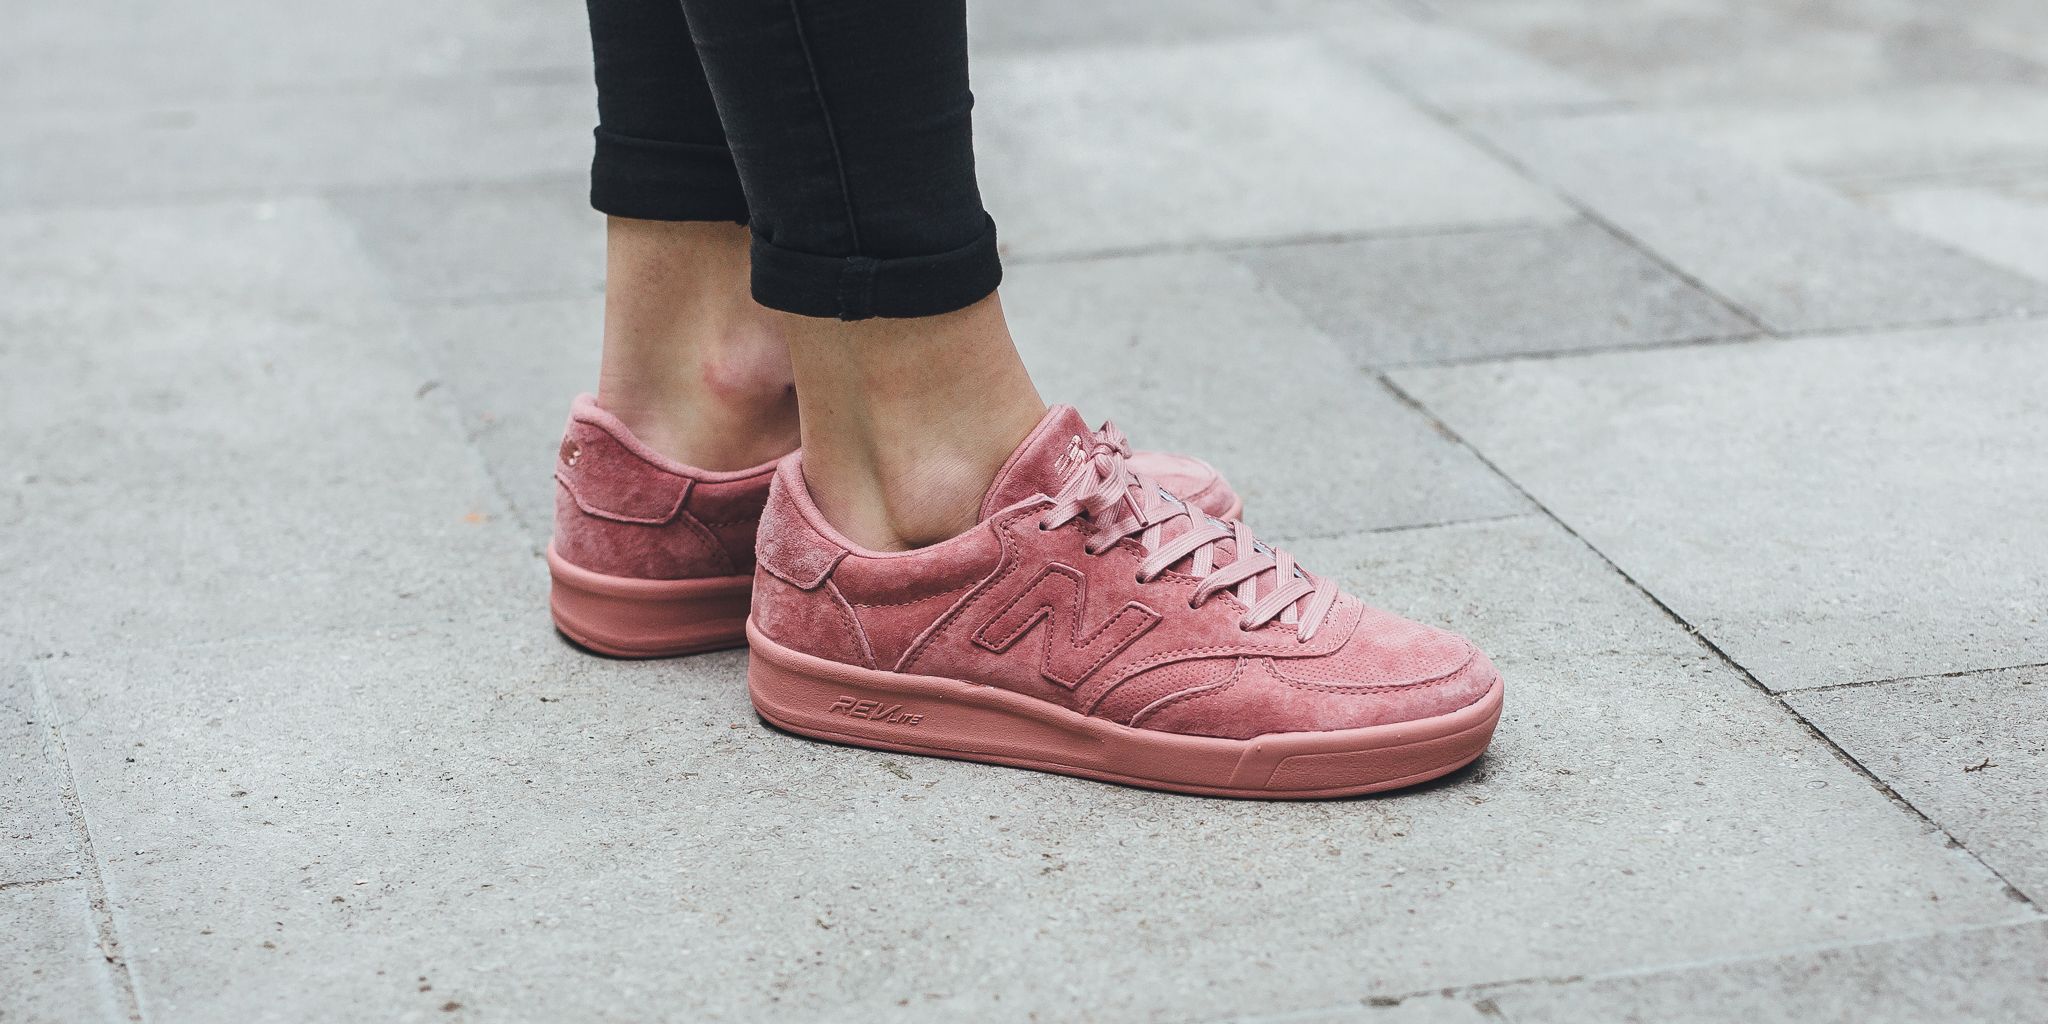 pot beginnen moord Titolo on Twitter: "NOW ON SALE %% New Balance WRT300PP (pink) available  here: https://t.co/cBst6HtrIY #SpringSale #NewBalance #sneakers #Sale  https://t.co/HHGhjeOZoH" / Twitter